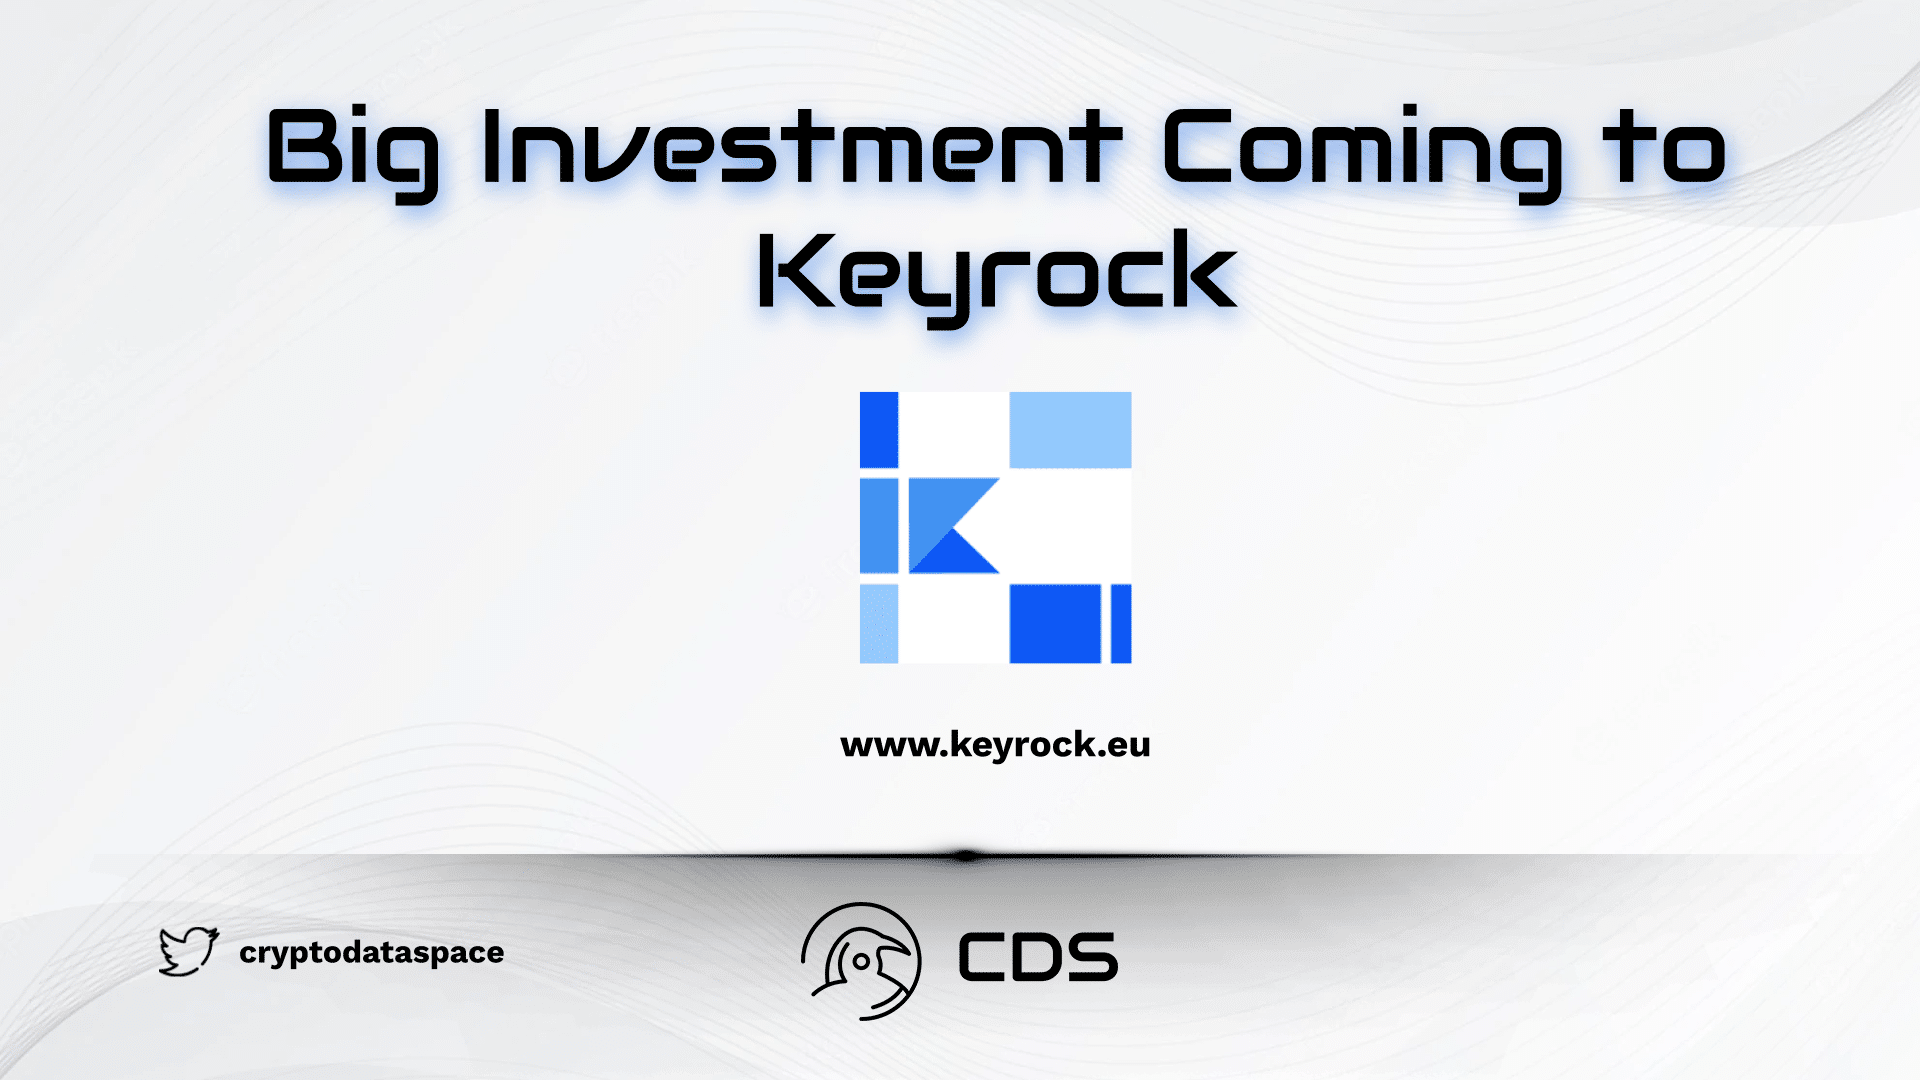 Big Investment Coming to Keyrock